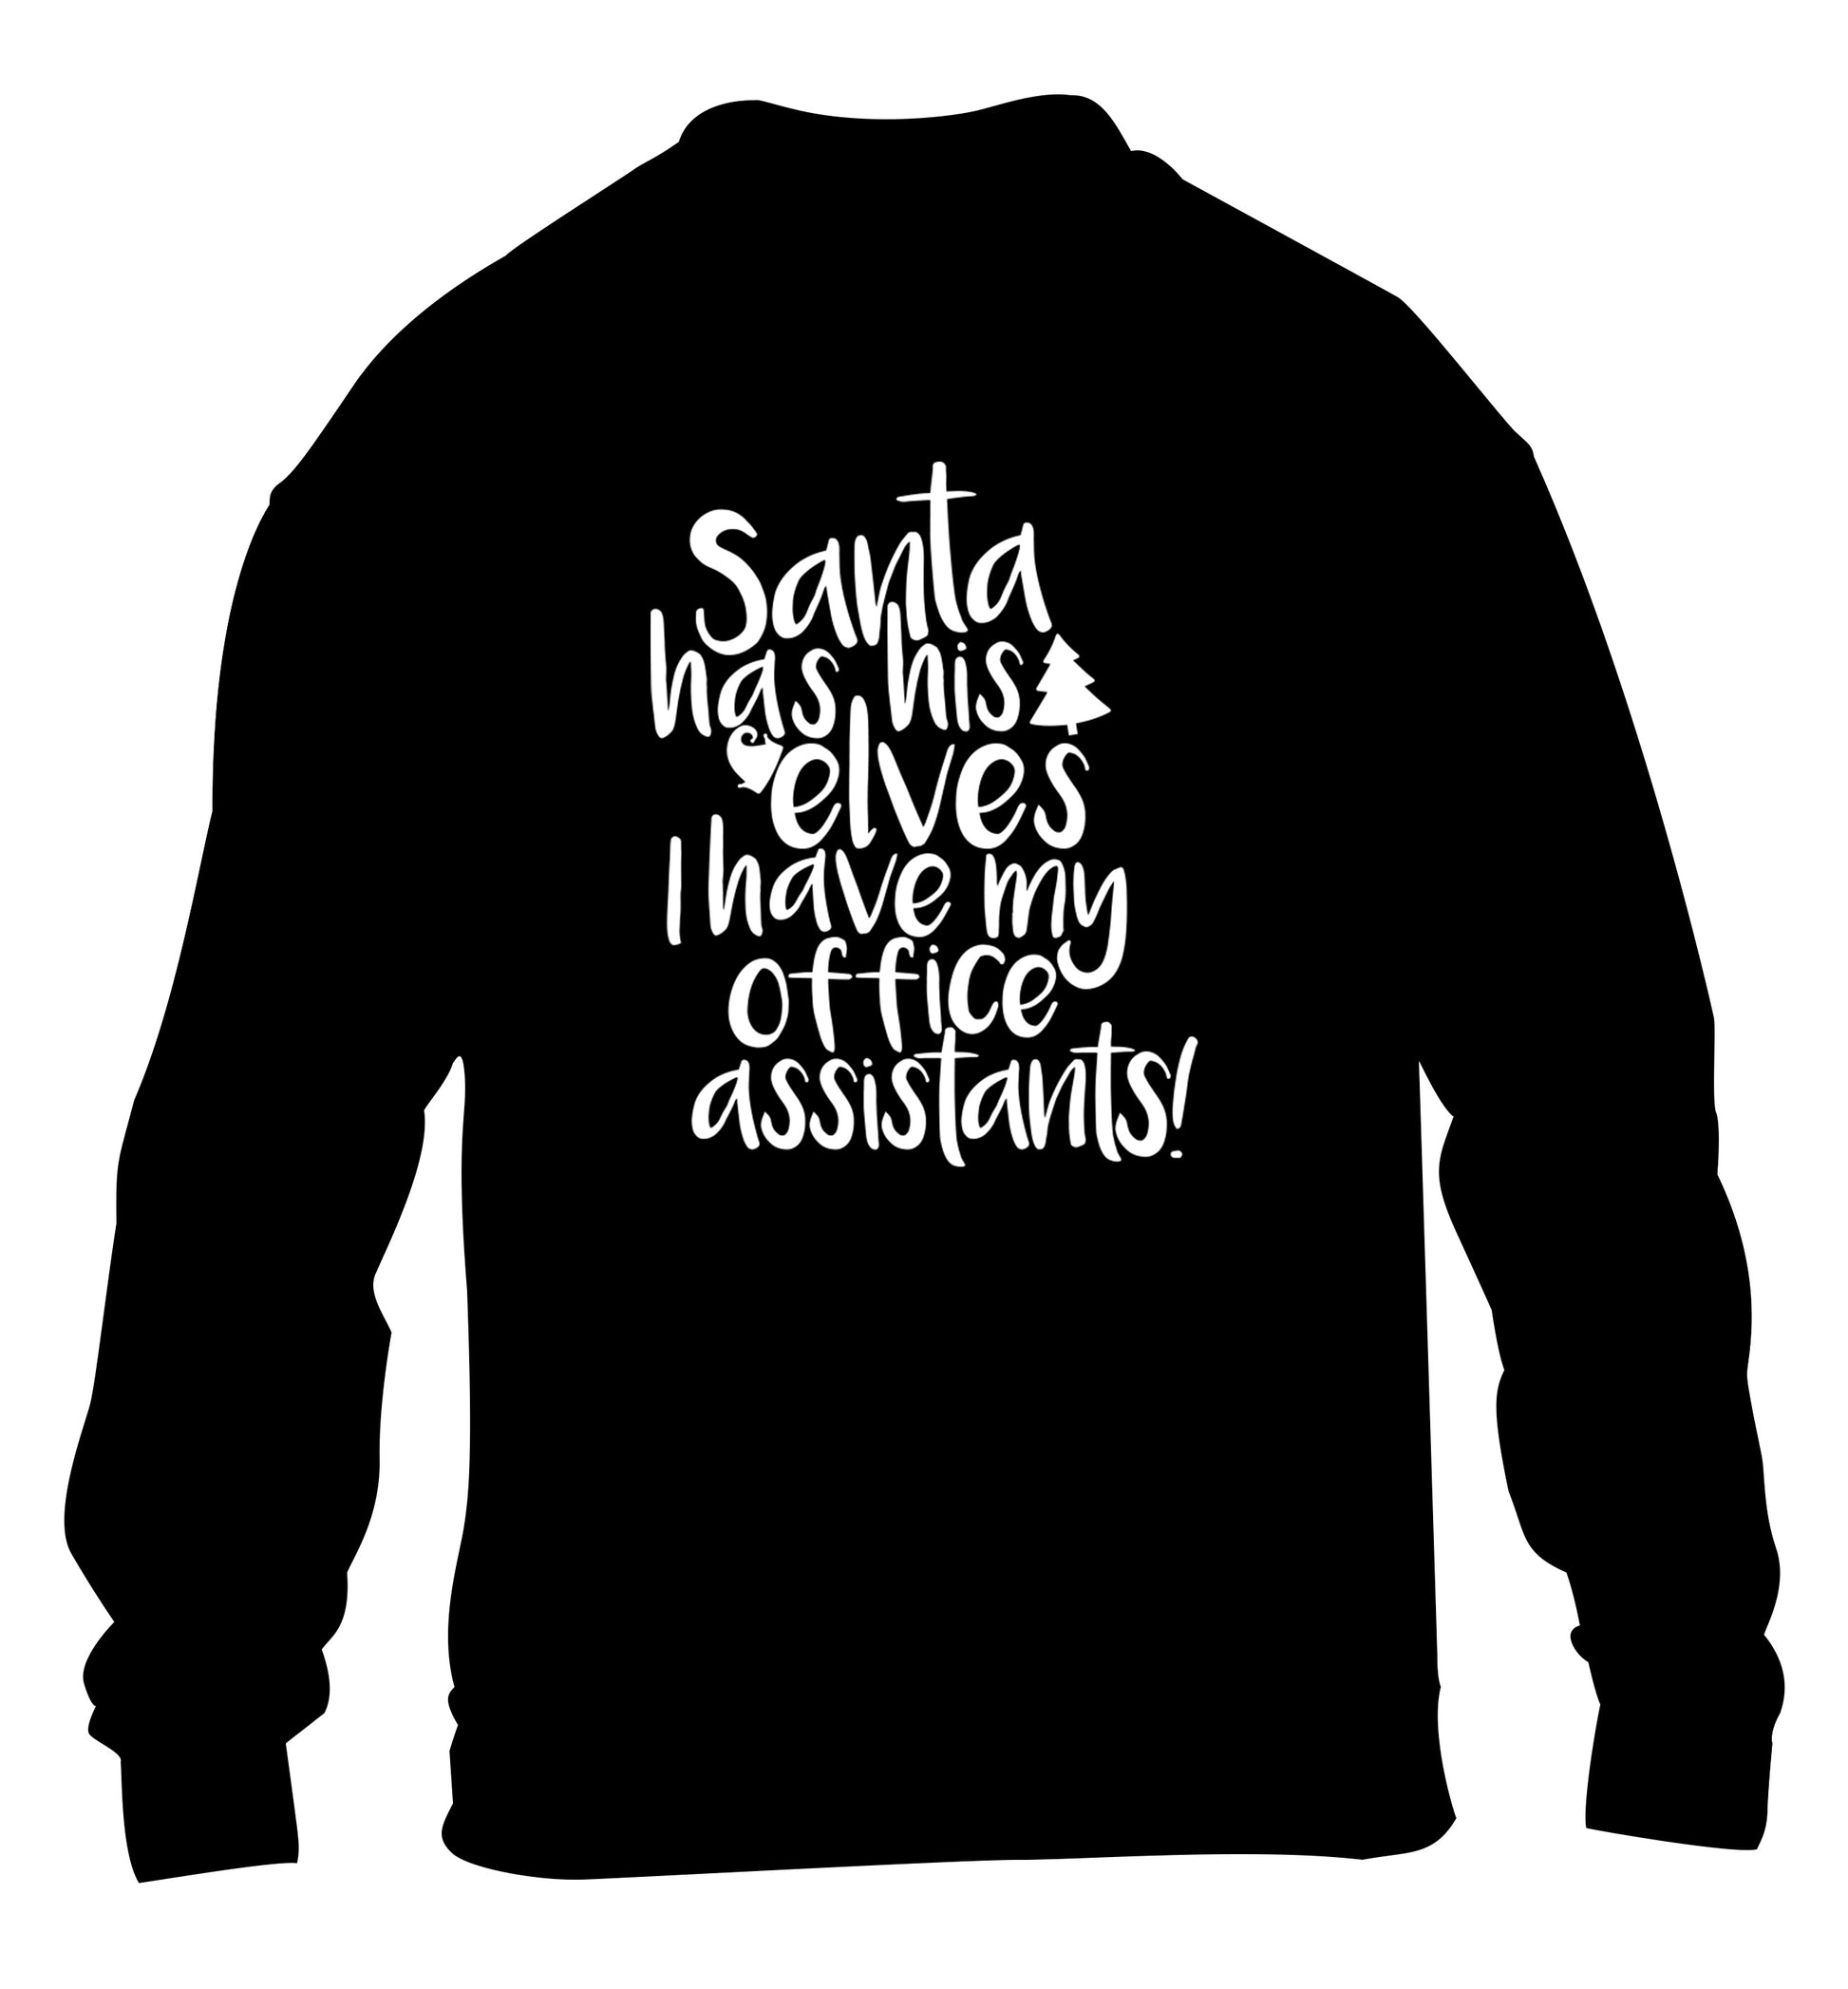 Santa has elves I have office assistants children's black sweater 12-13 Years